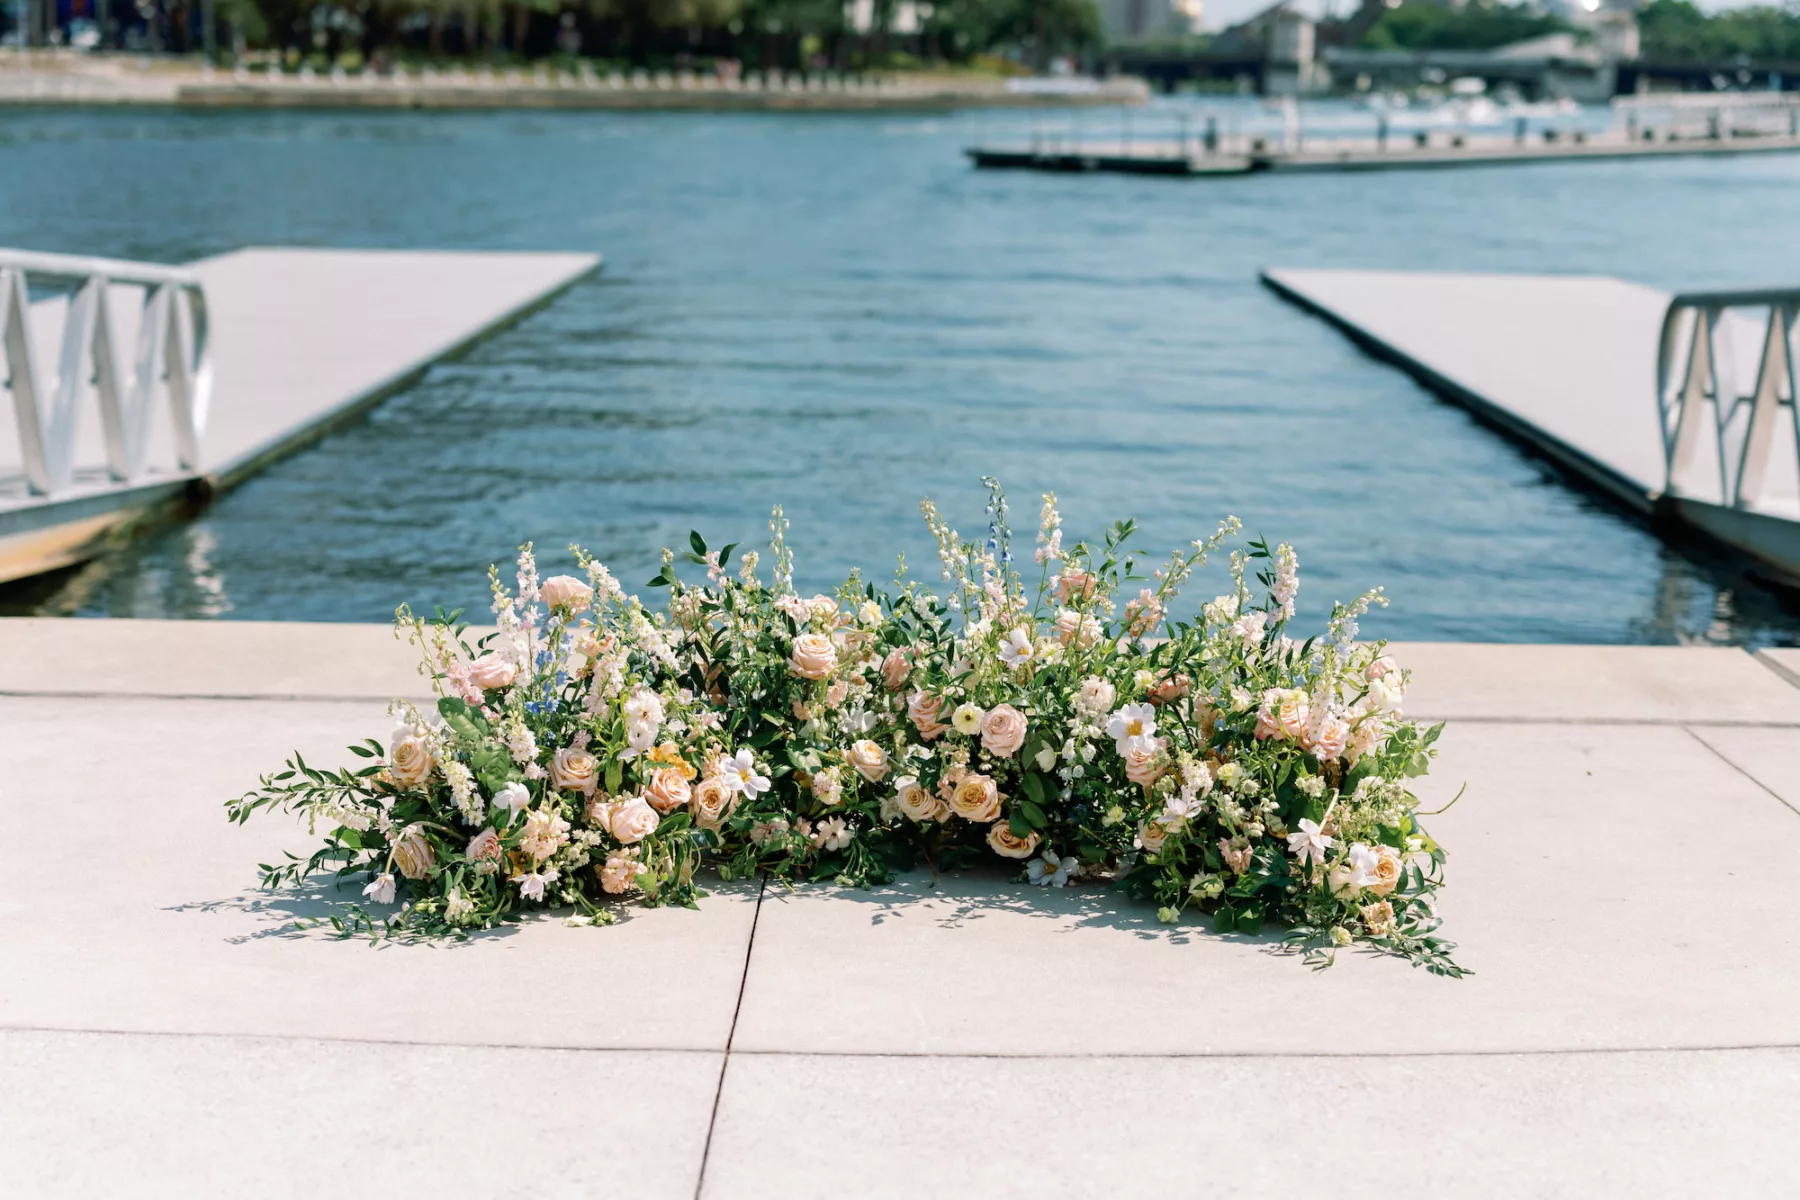 Elegant Outdoor Waterfront Pastel Wedding Ceremony Inspiration | Altar Floral Decor Ideas with Pink Roses, White Poppy, Blue and White Campanula, and Greenery